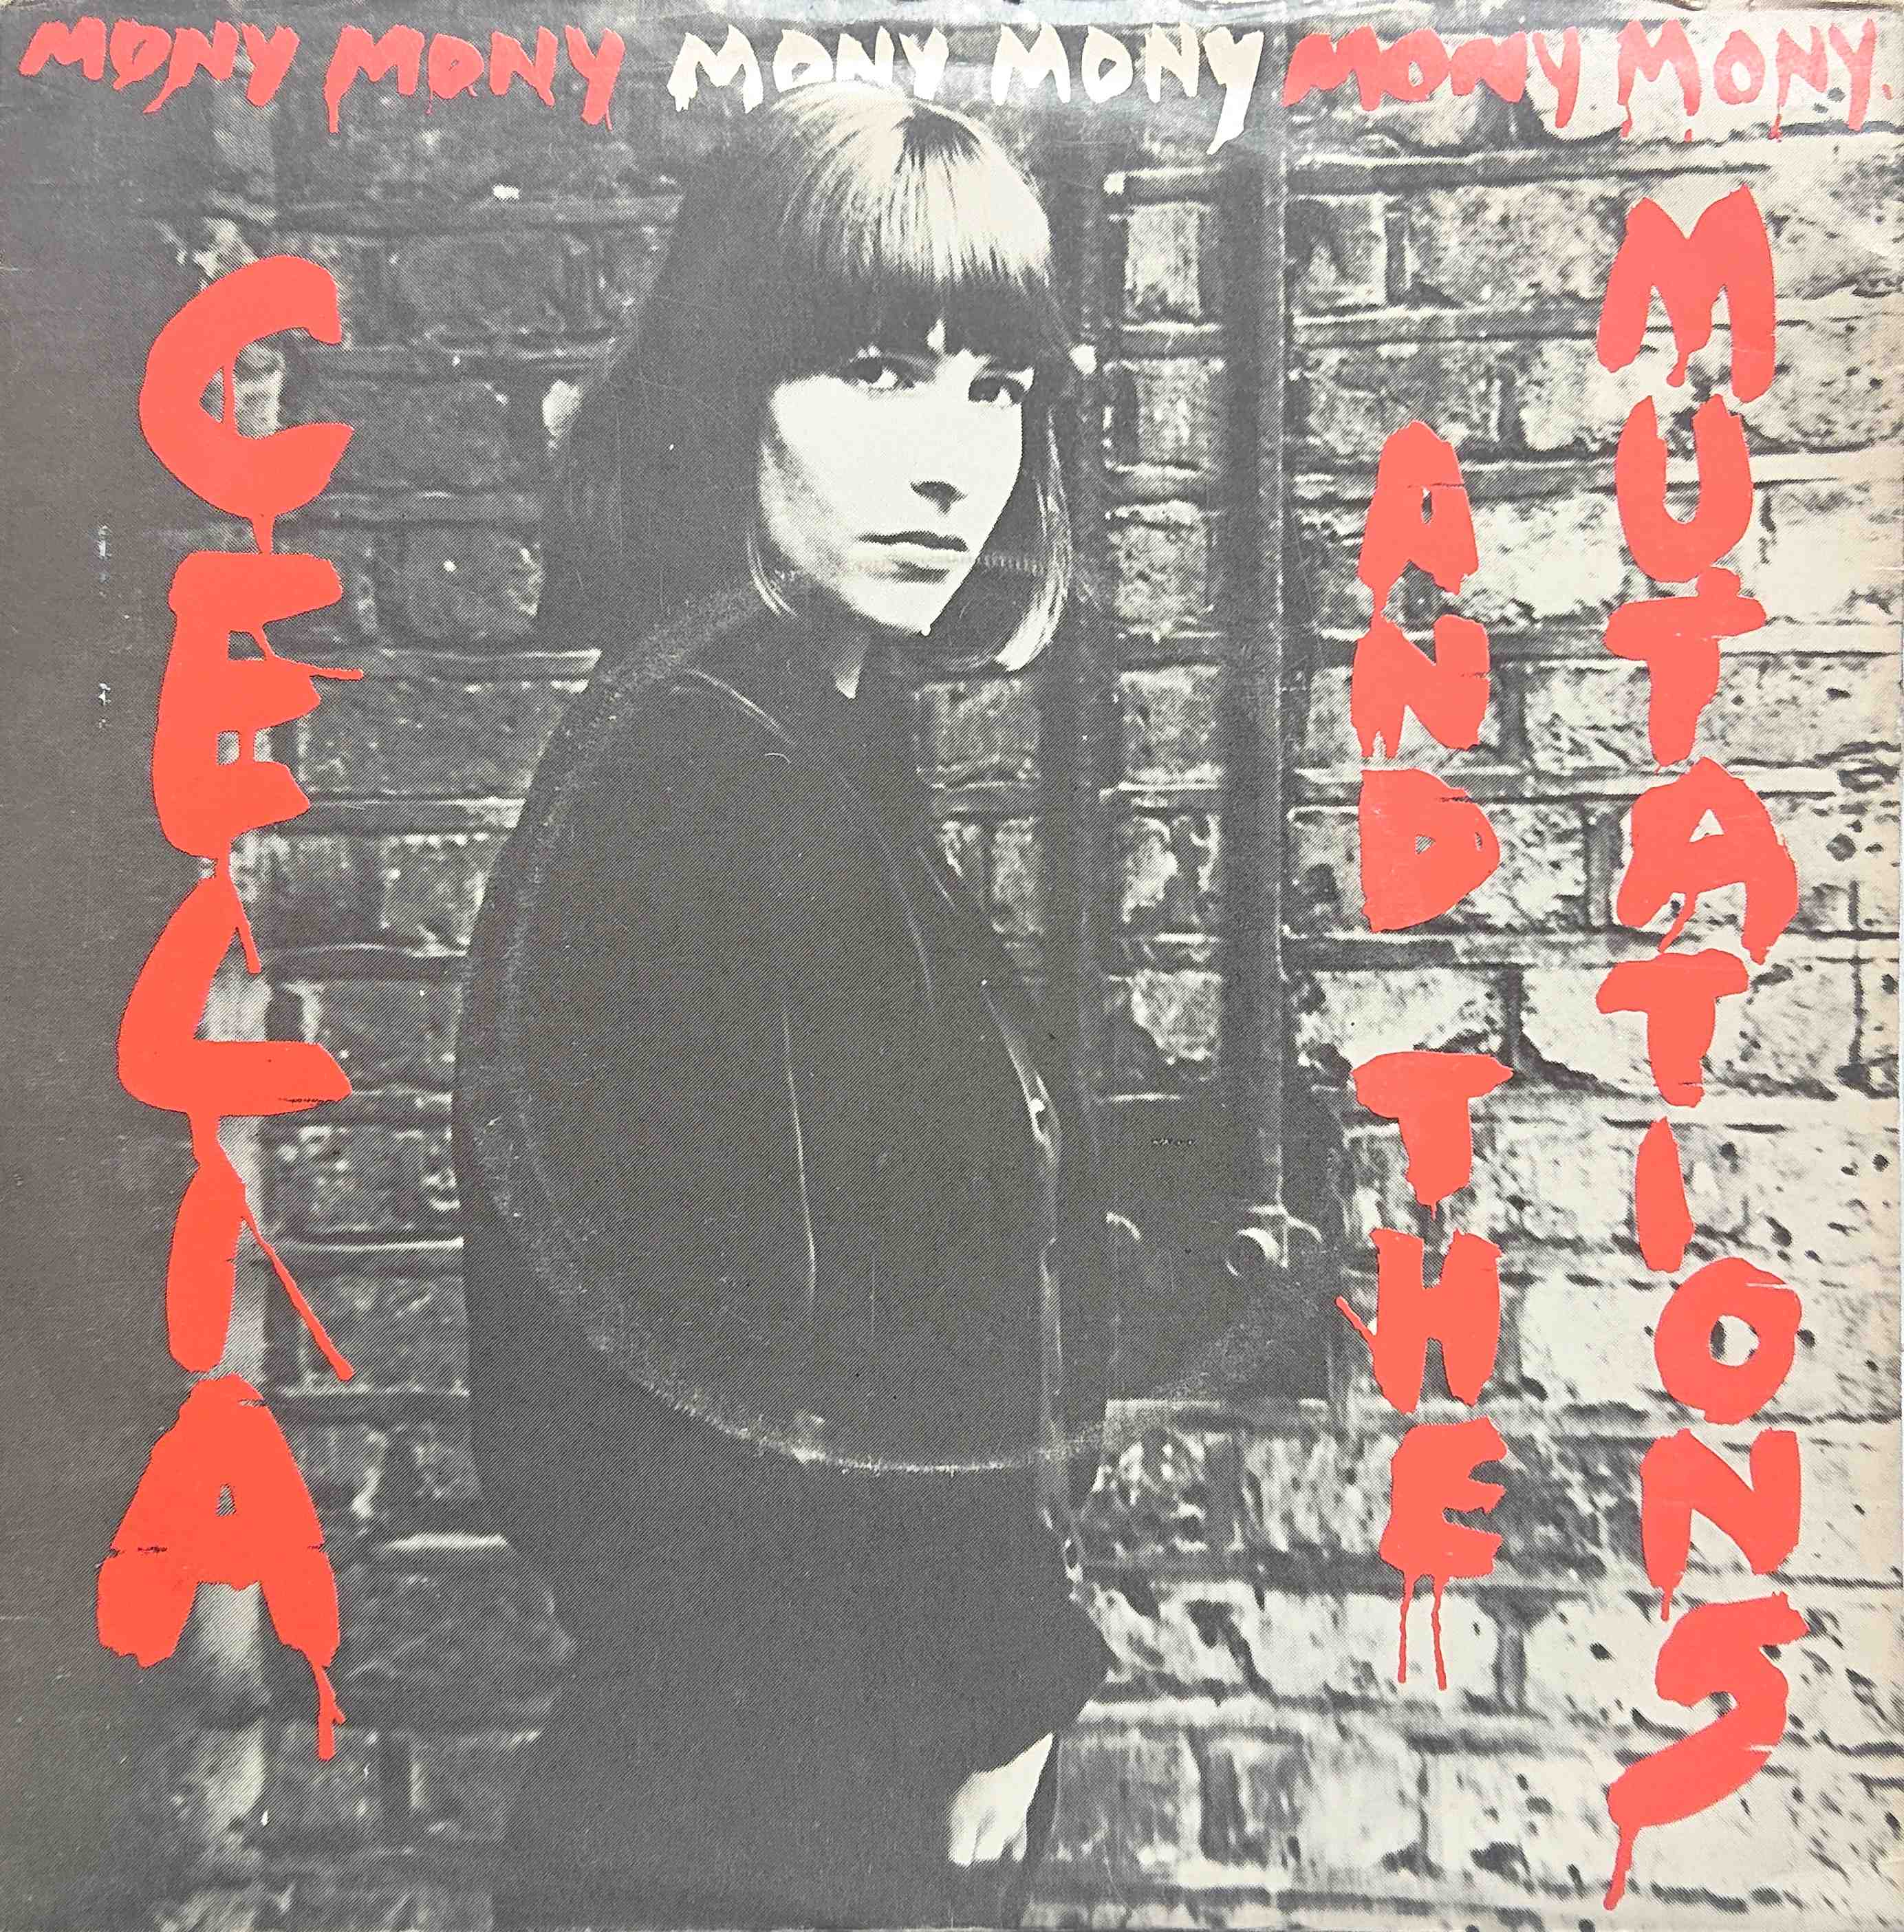 Picture of Mony mony by artist Jean Jacques Burnel / Dave Greenfield / Celia and the Mutations from The Stranglers singles